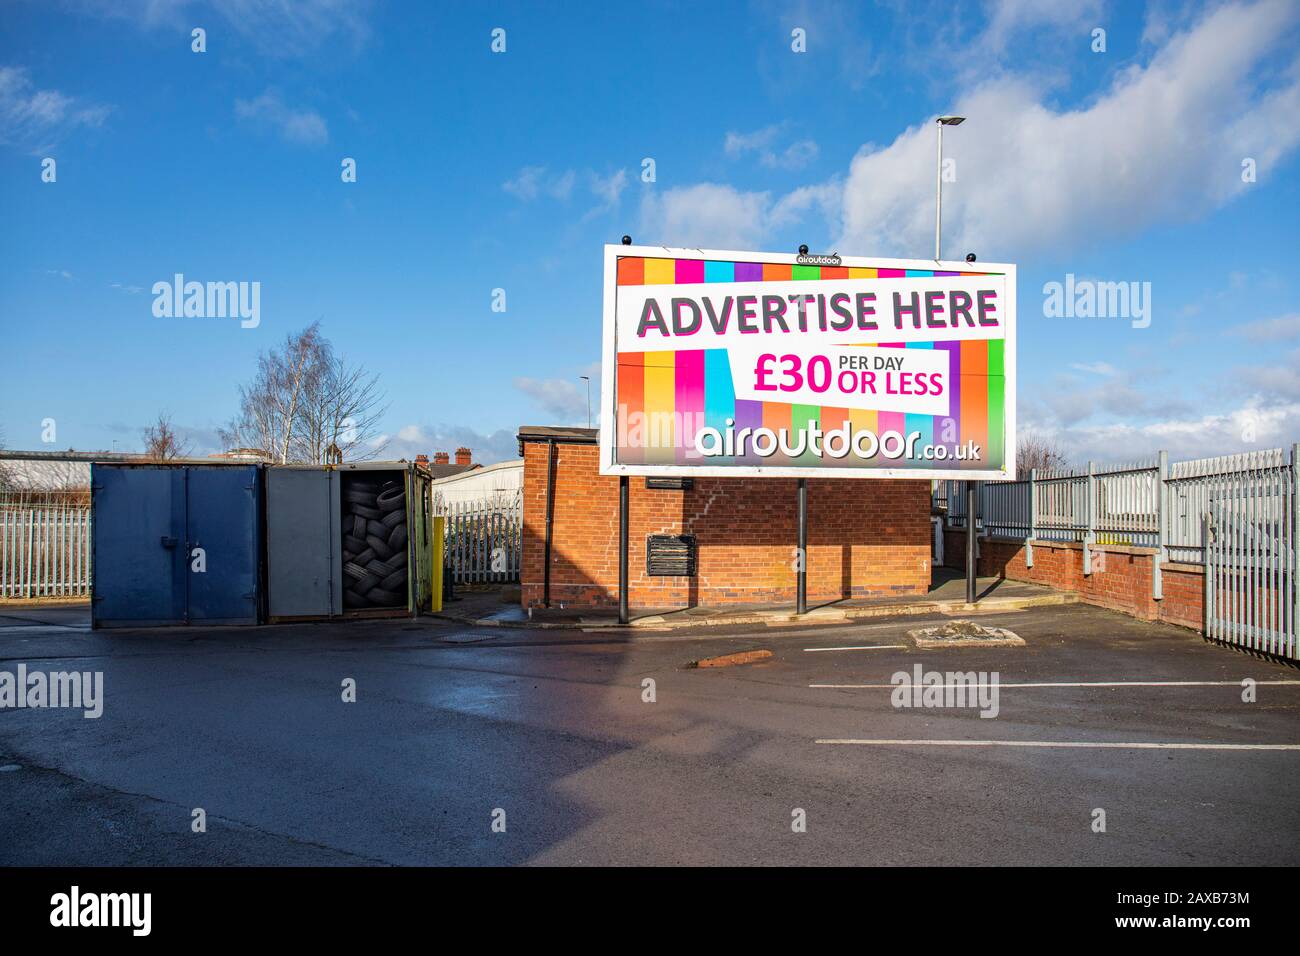 Airoutdoor billboard asking to advertise here for £30 per day or less Stock Photo